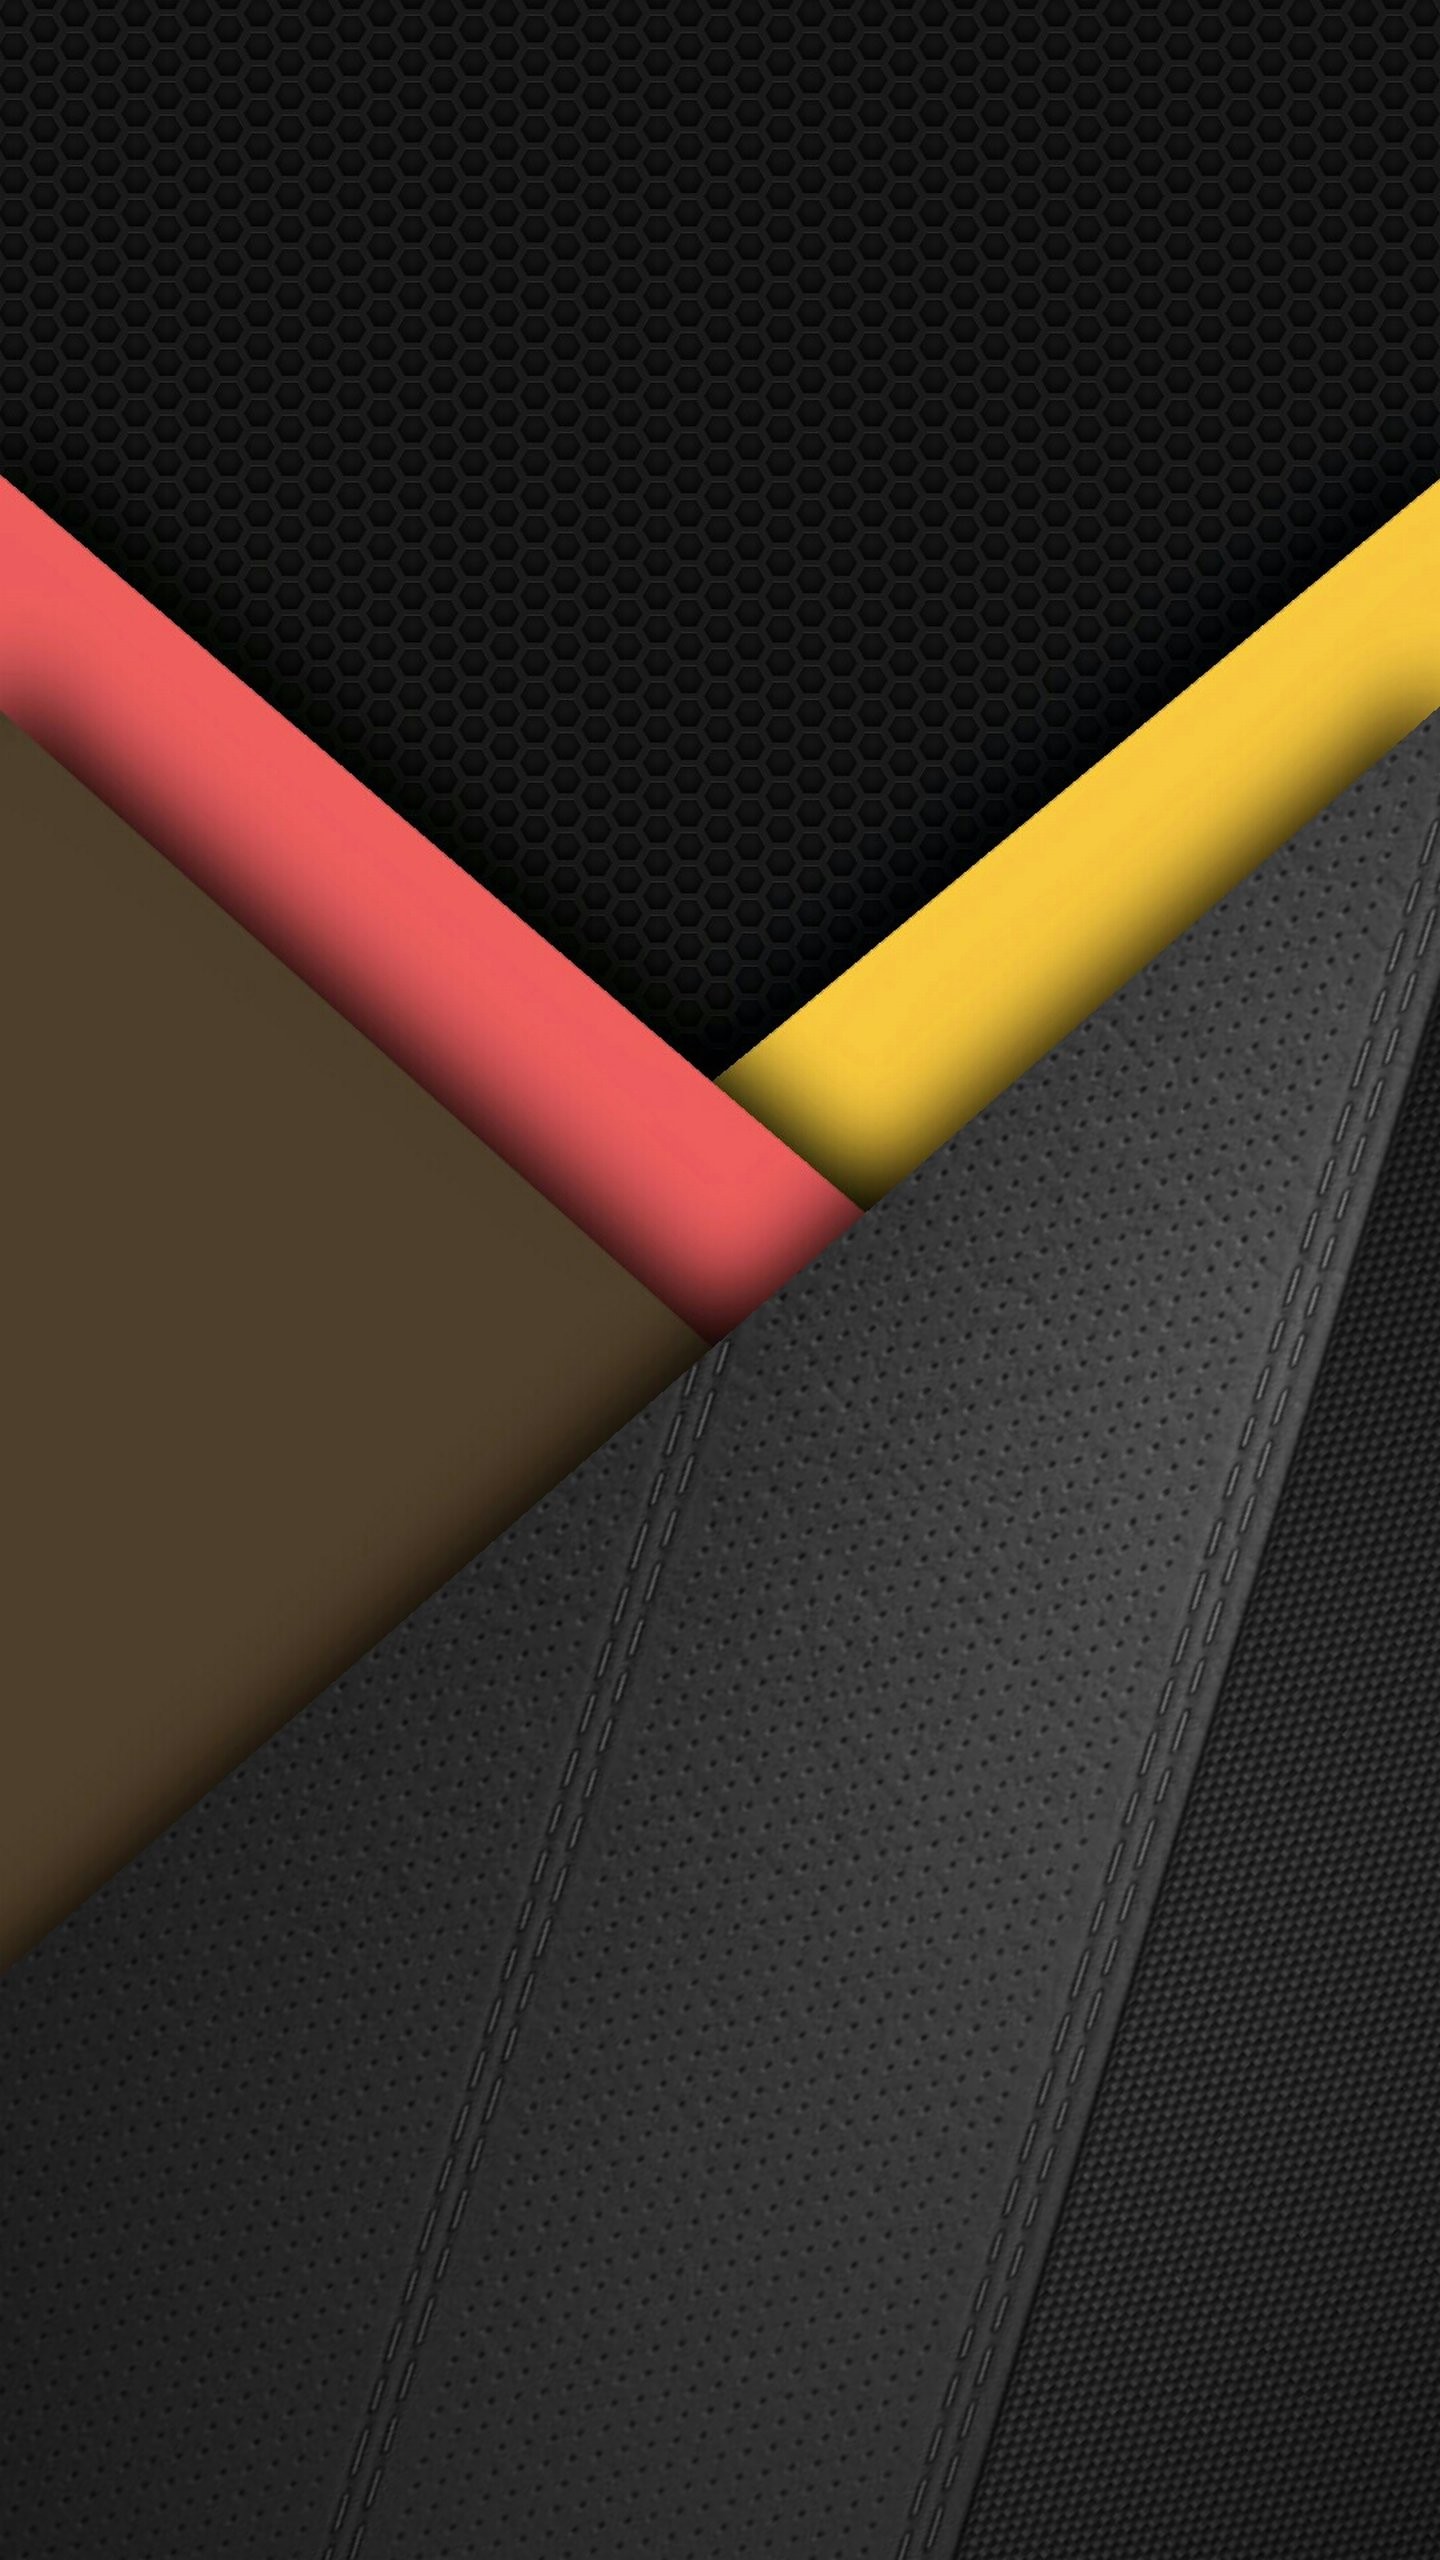 1440x2560 Wallpaper lg g4 grid and leather 1440 2560 qhd